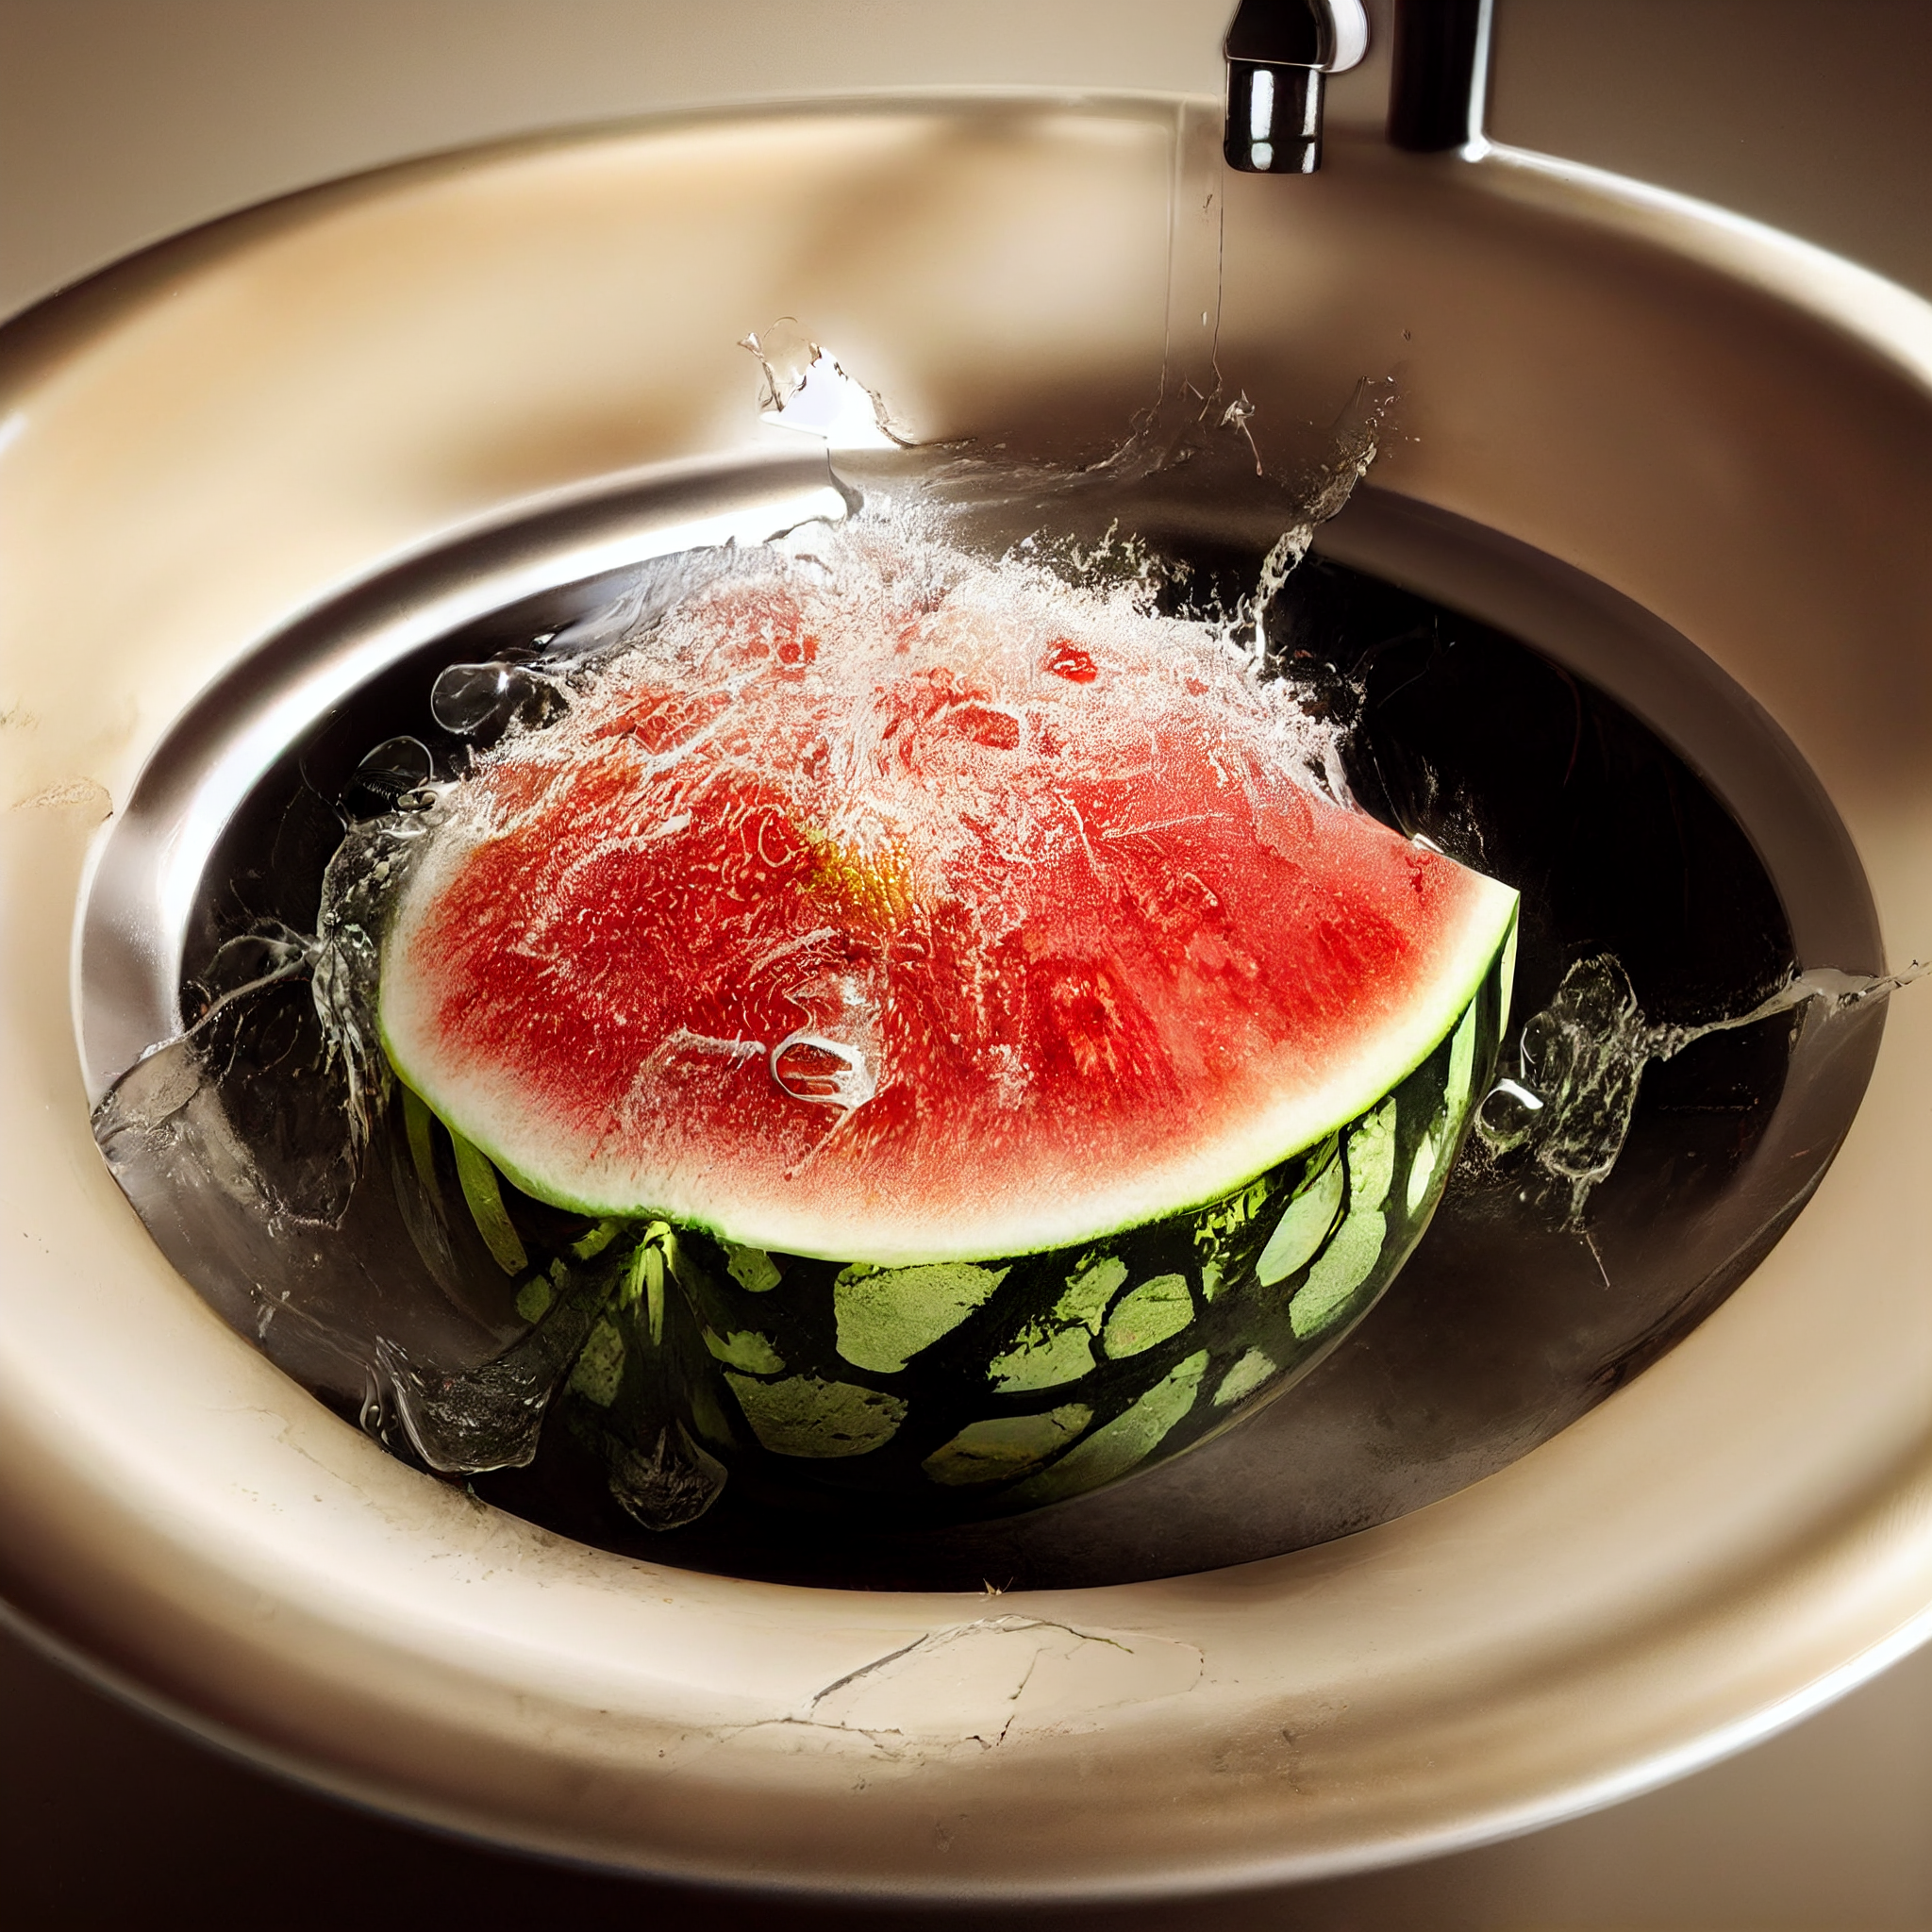 EricdeBroche_the_kitchen_sink_clogged_by_a_watermelon_photograp_d57f8977-5be6-4e9c-9438-101e4e00cf2f.png